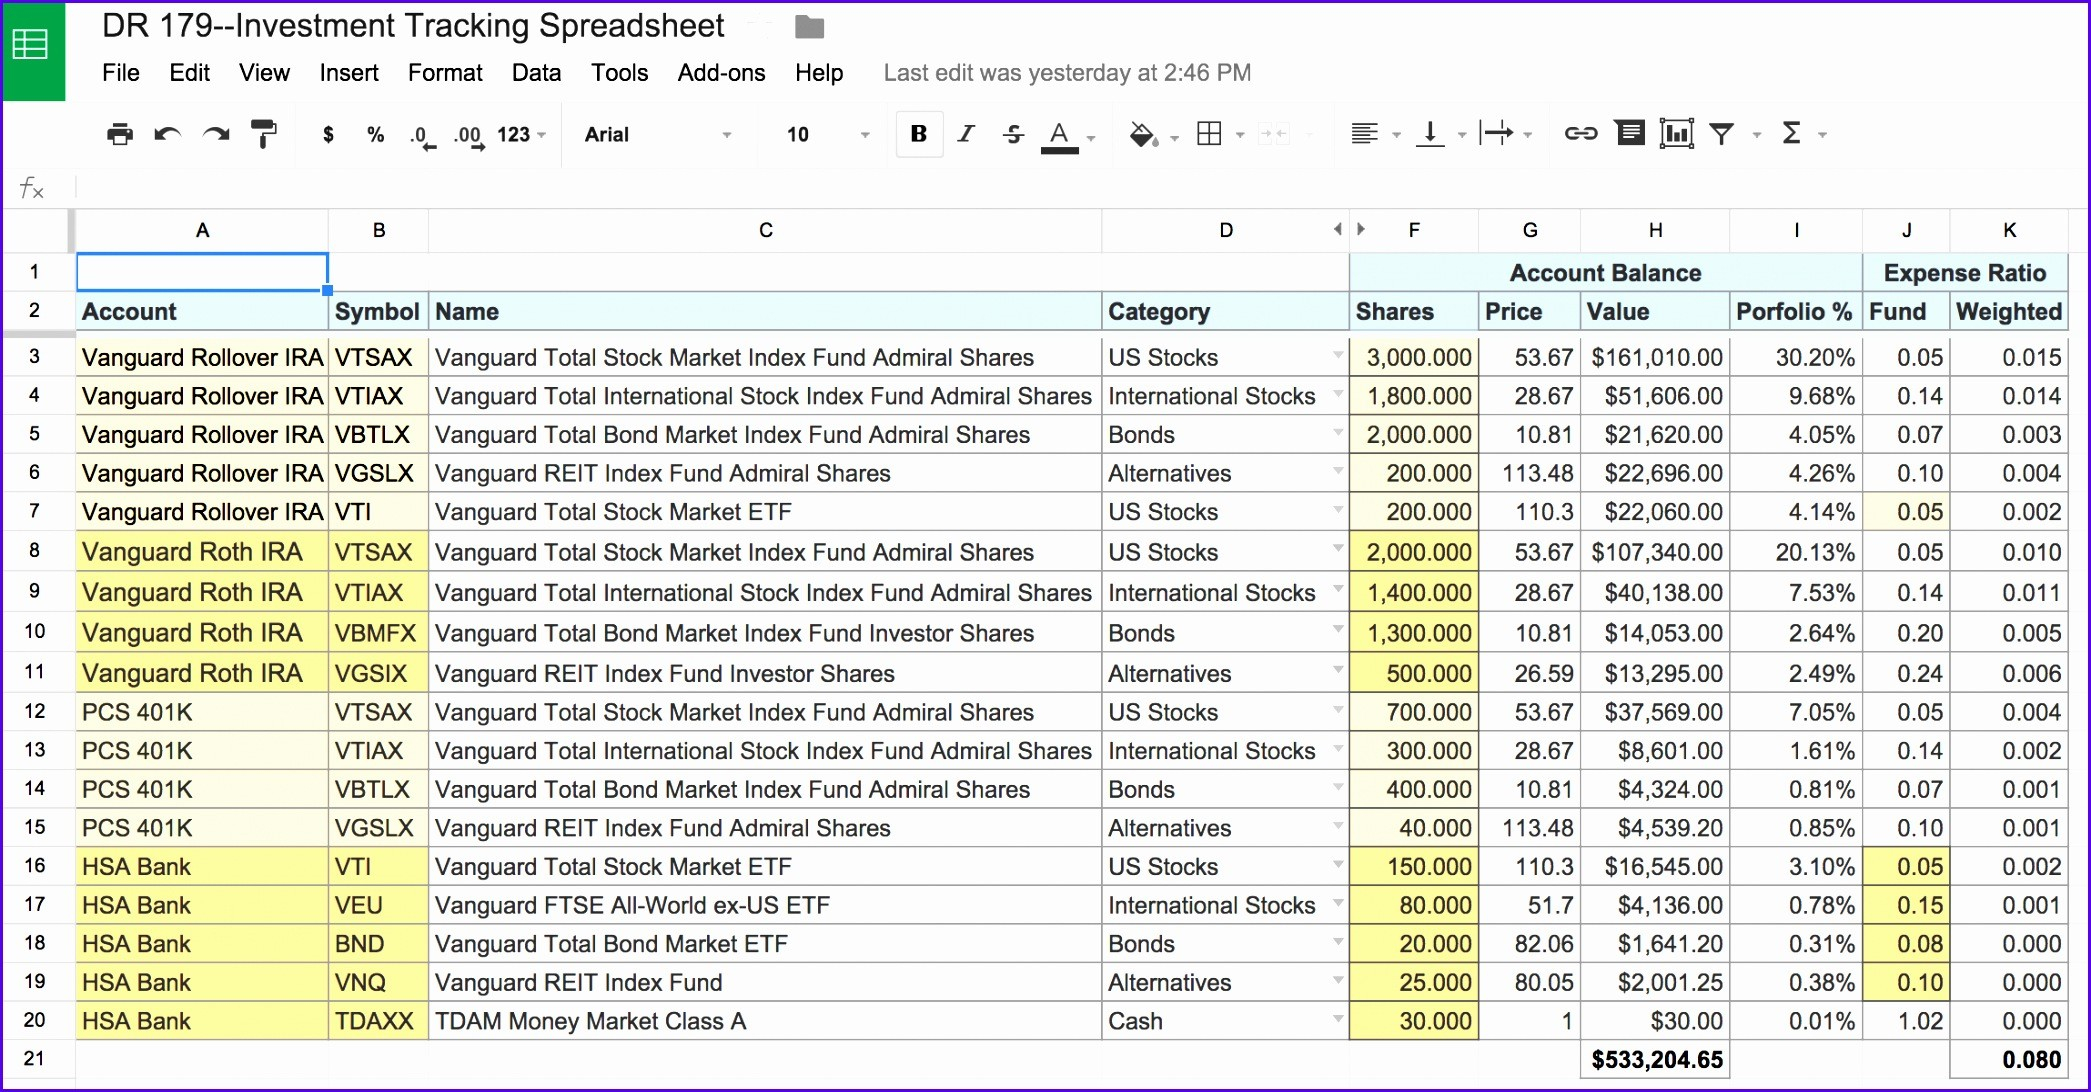 customer-tracking-spreadsheet-excel-db-excel